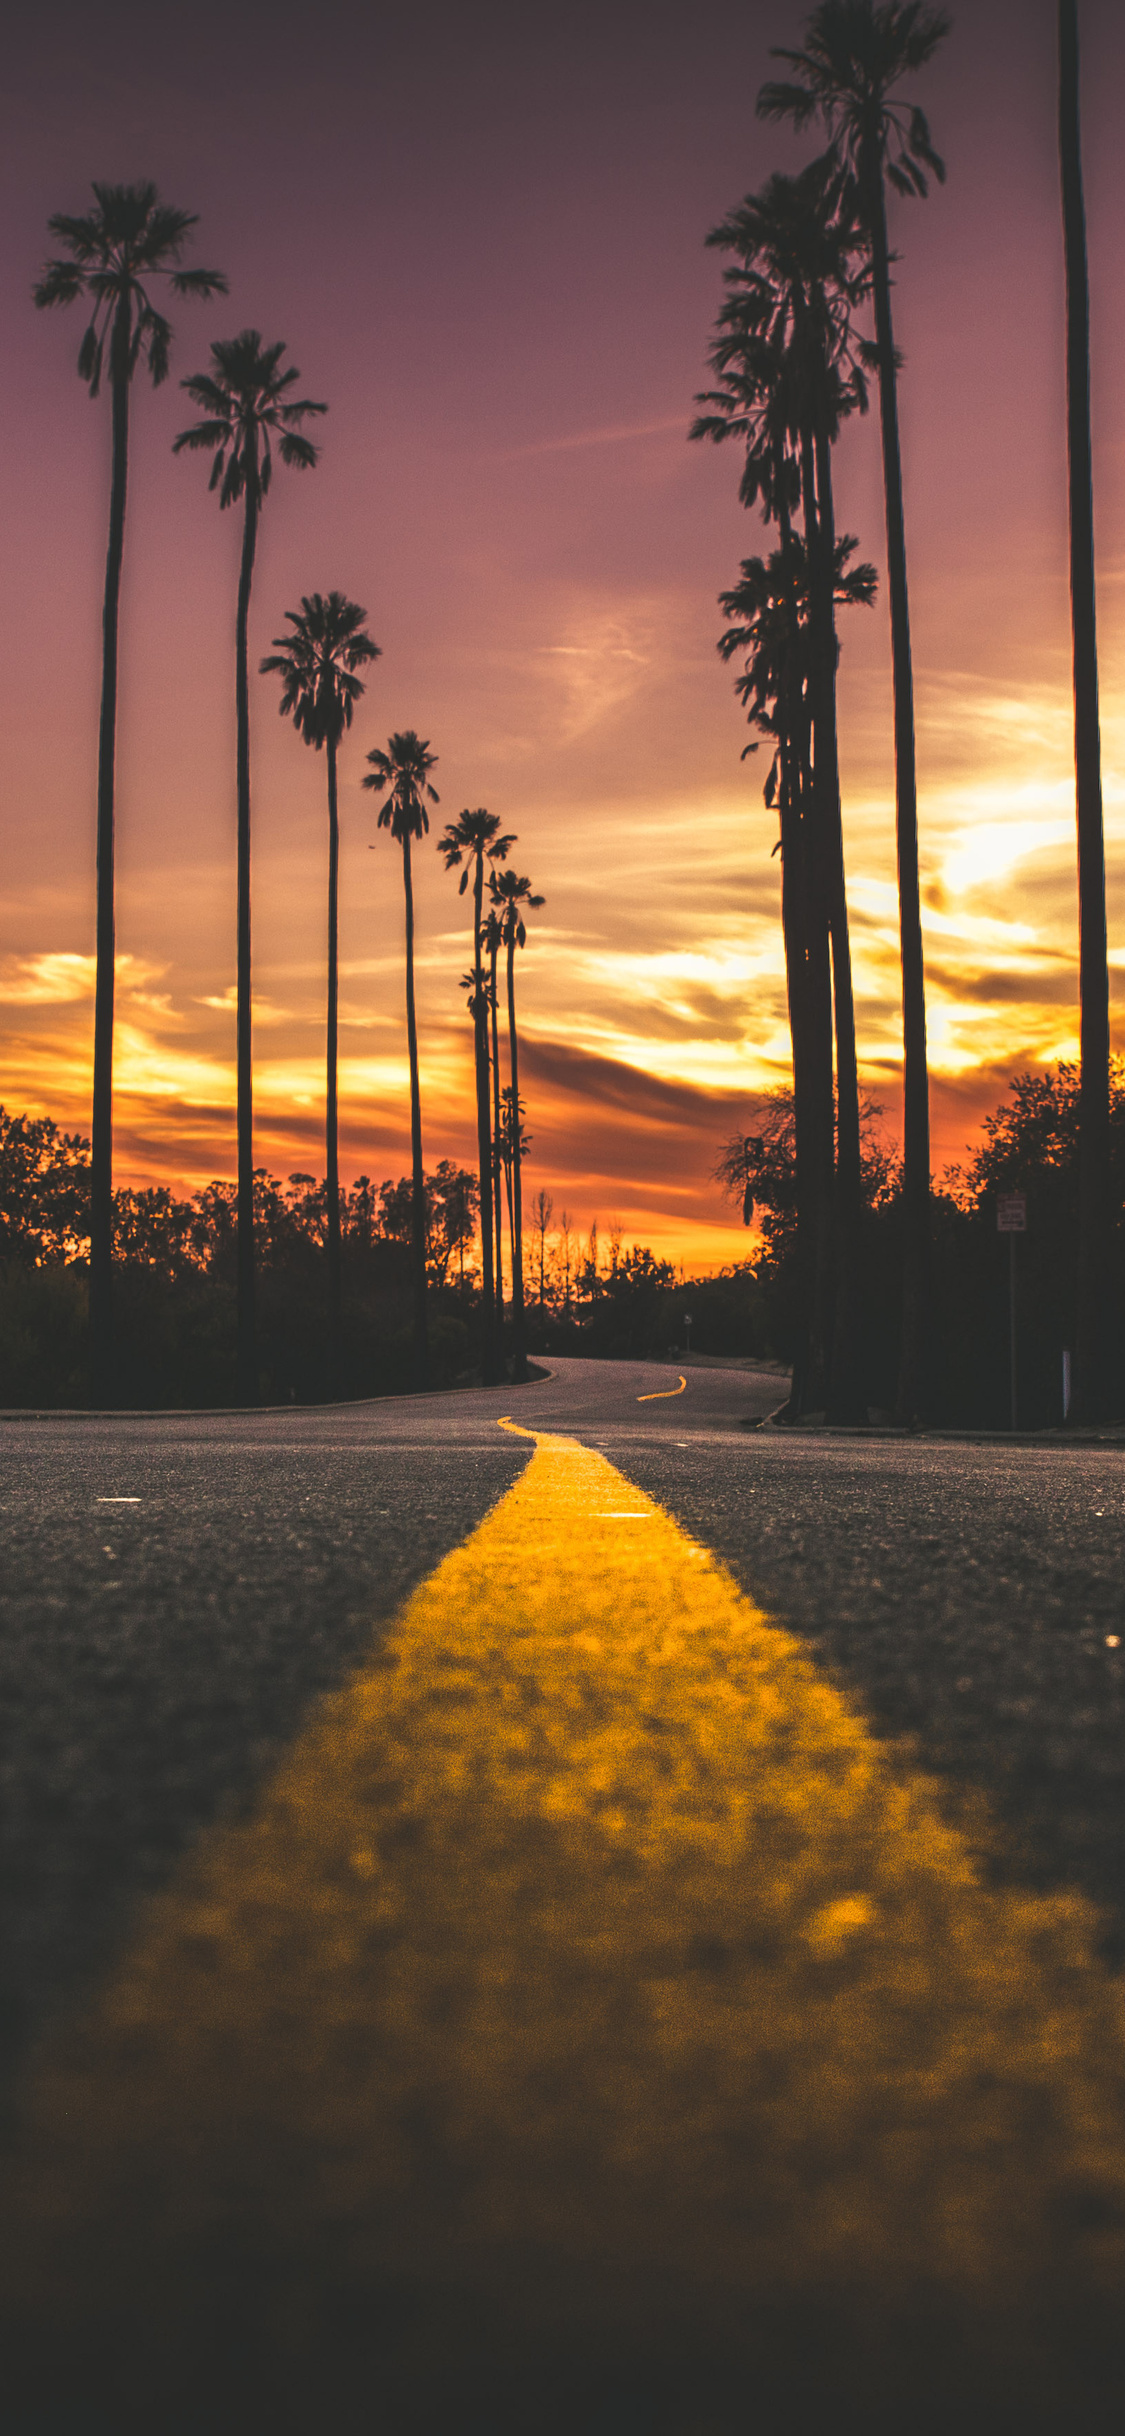 1125x2436 Road In City During Sunset Iphone XS,Iphone 10 ...